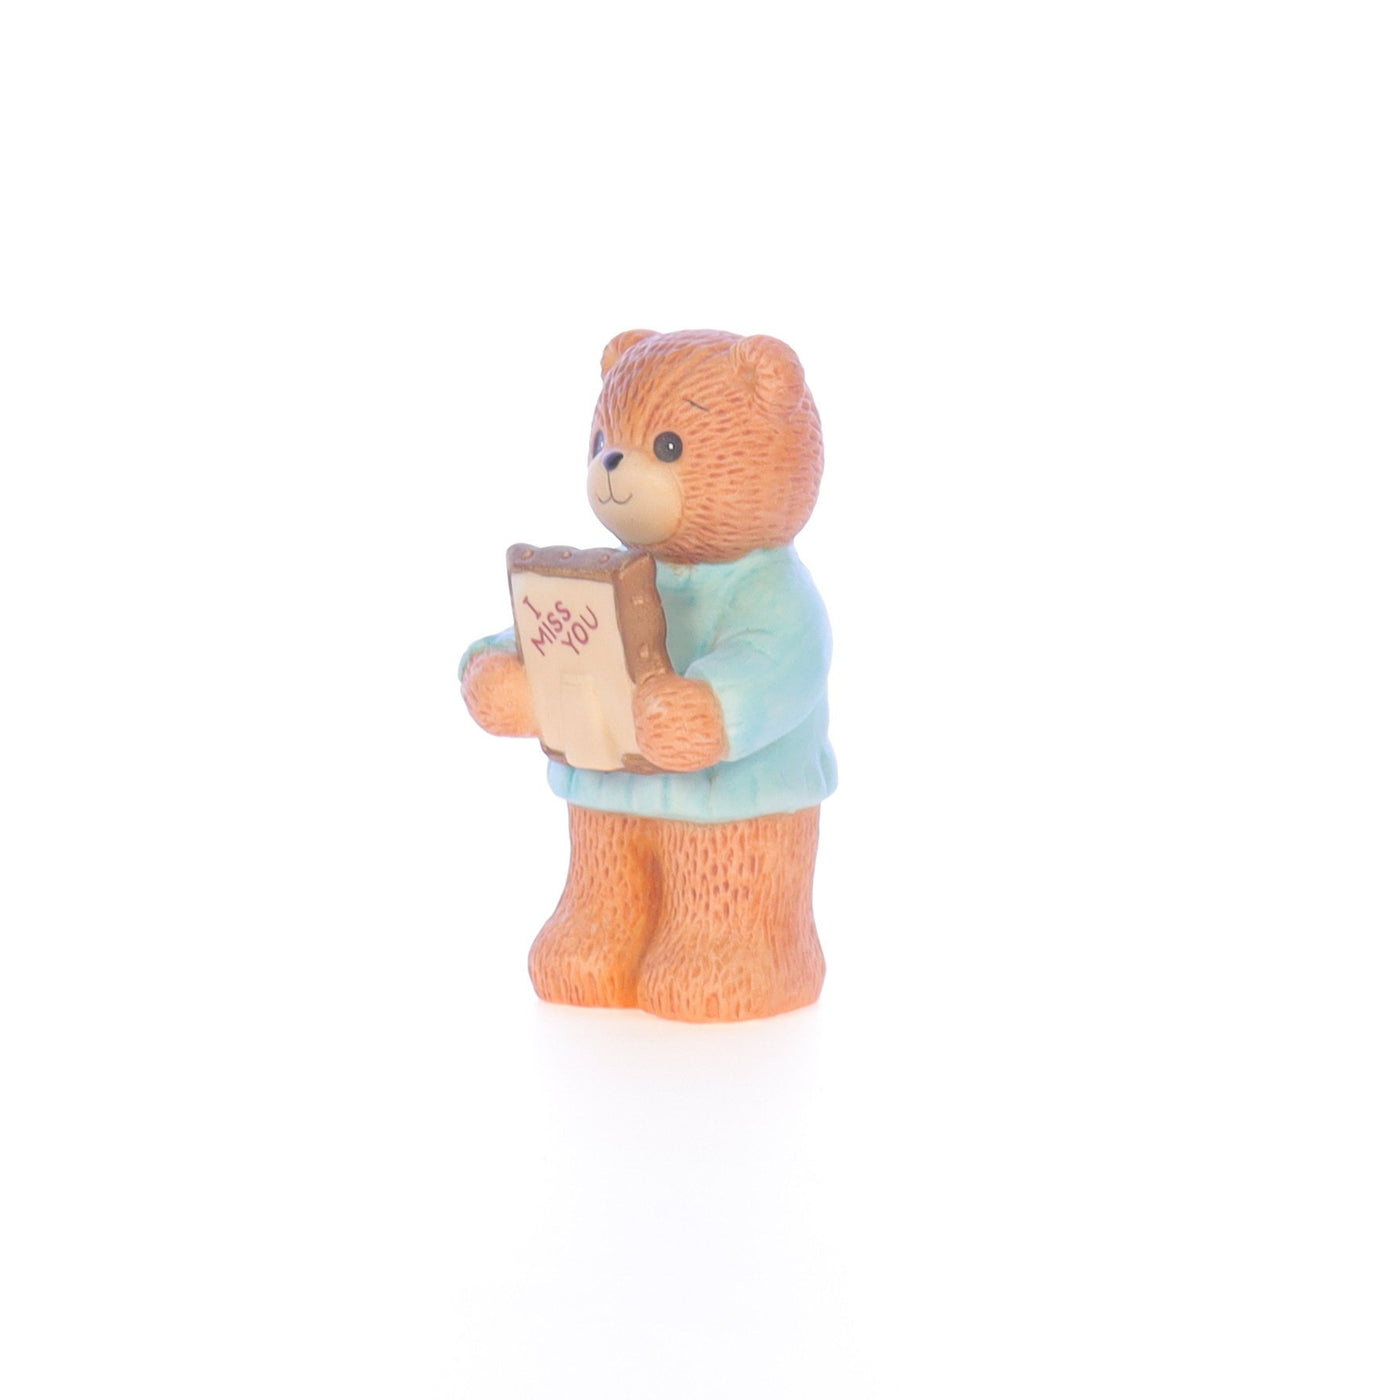 Lucy_And_Me_by_Lucy_Atwell_Porcelain_Figurine_I_Miss_You_Bear_Lucy_Unknown_066_02